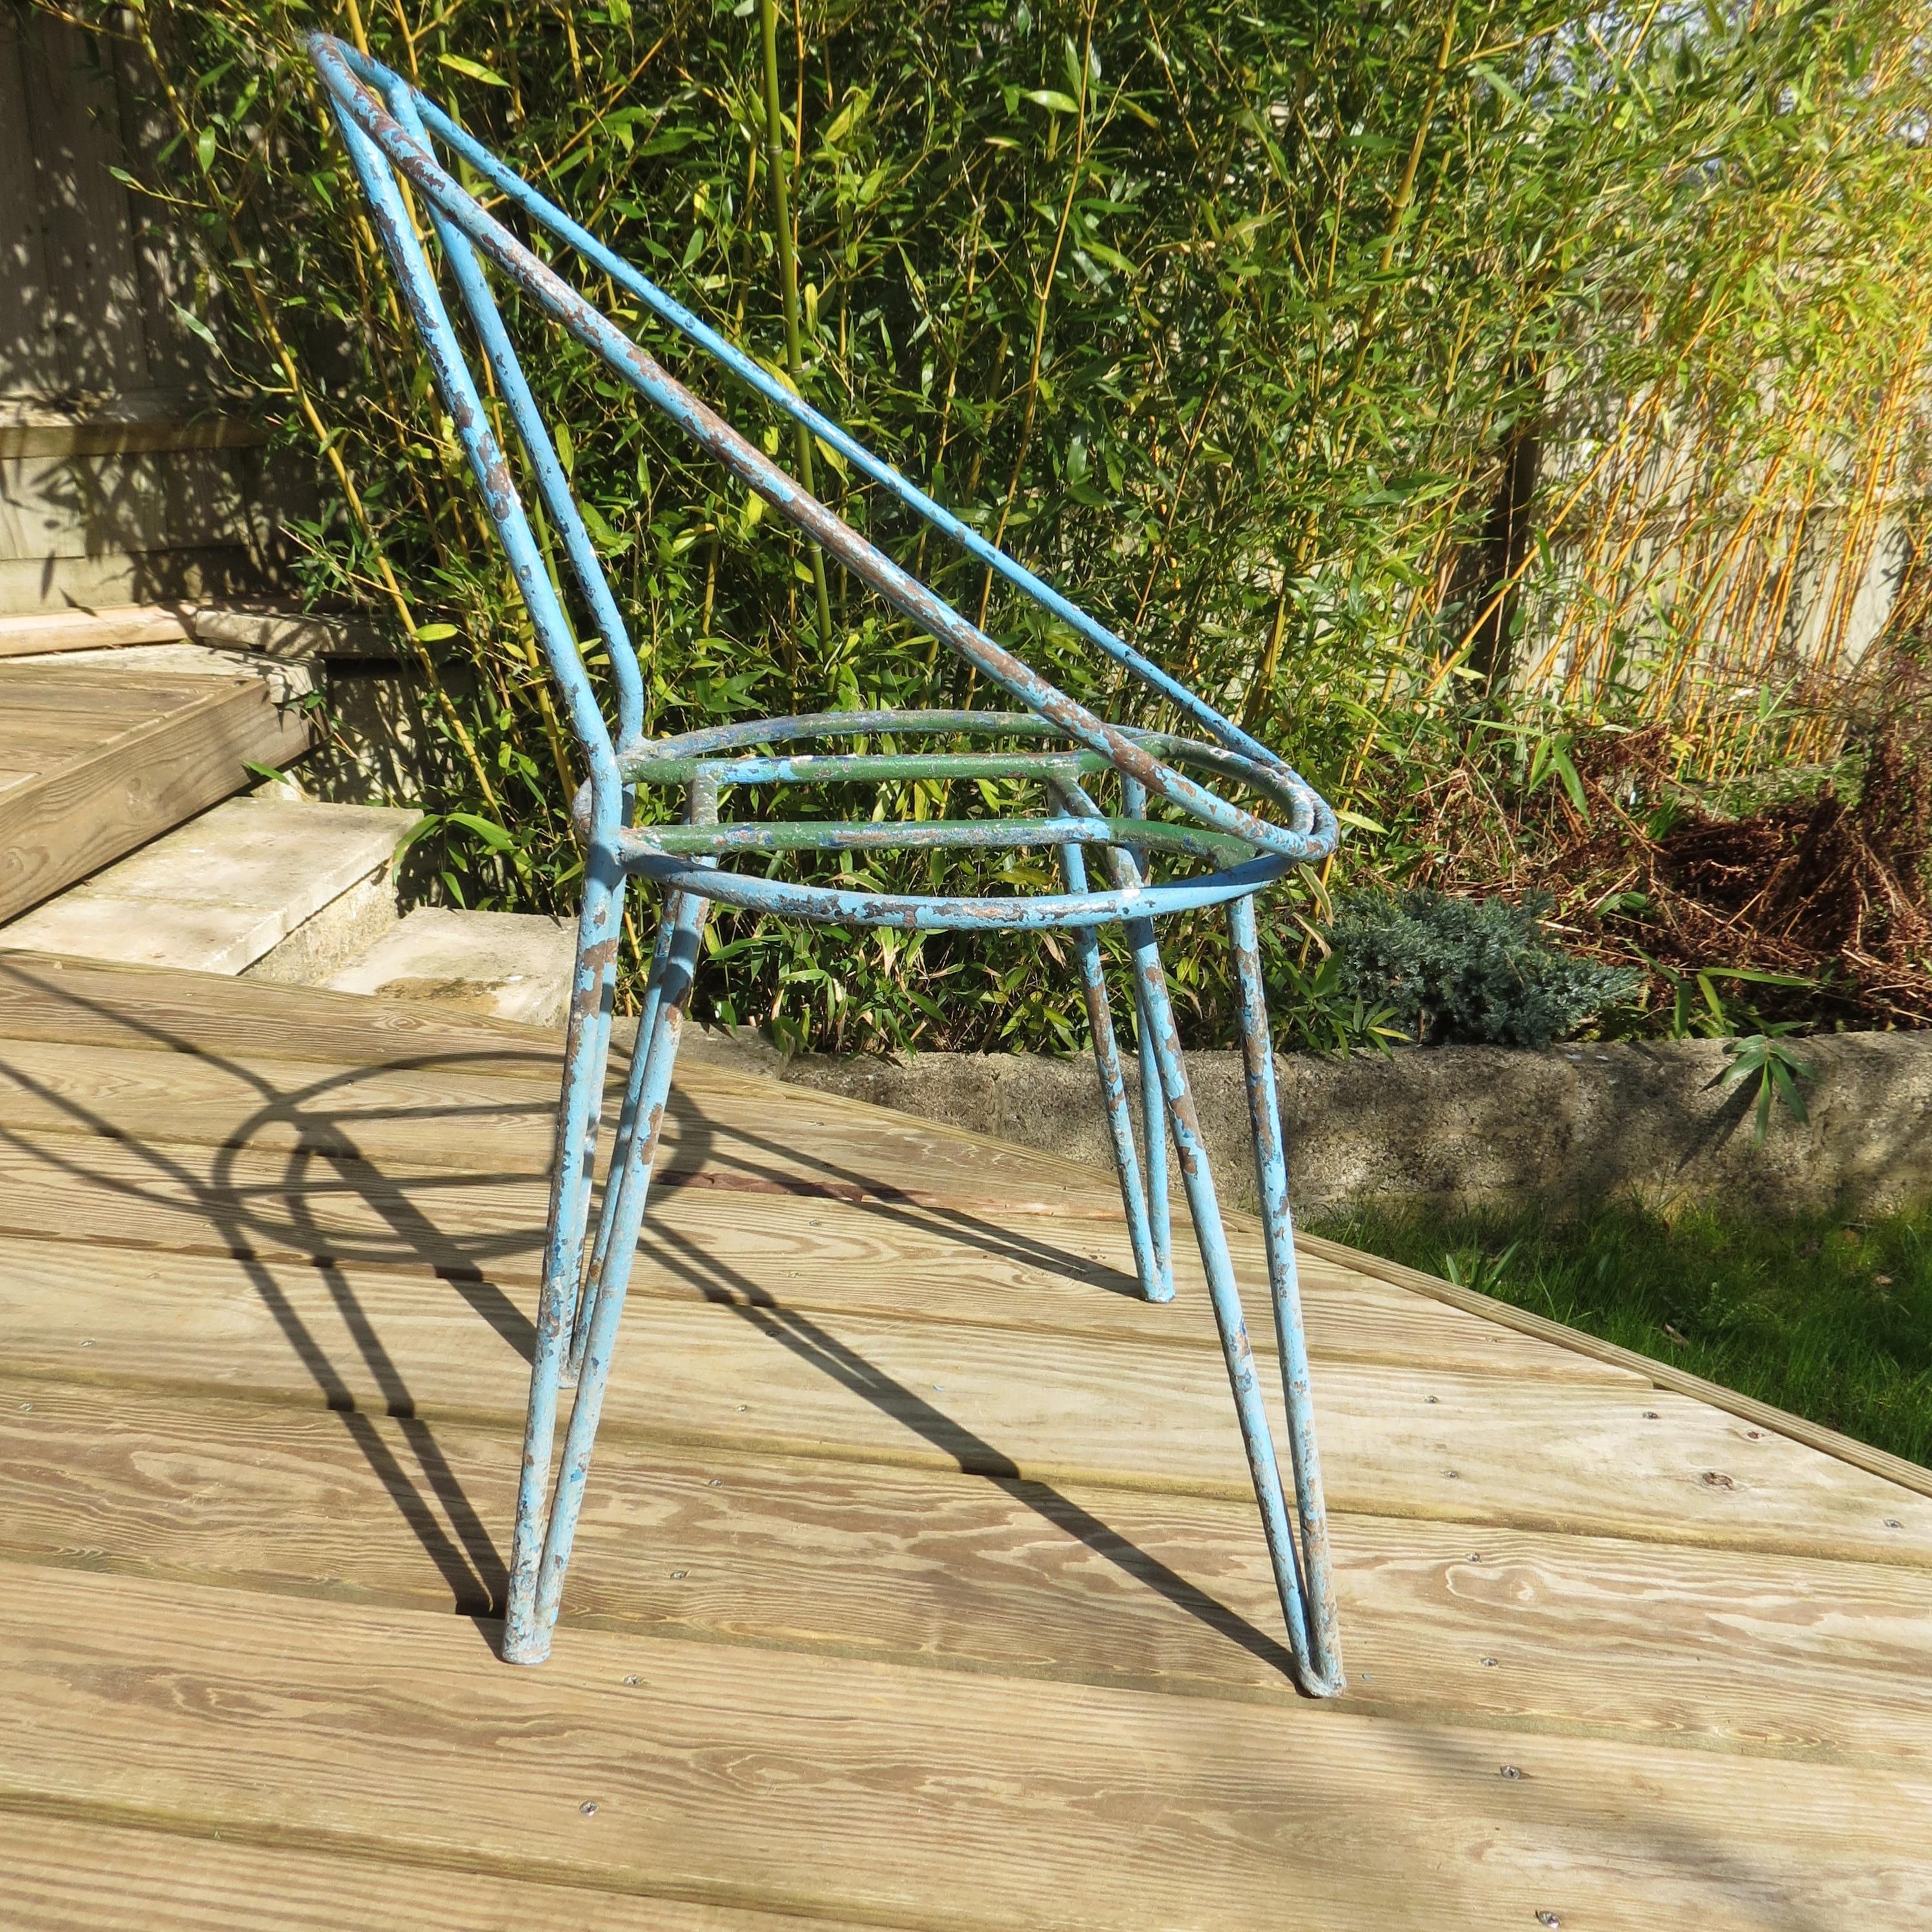 German Set of 4 Metal Garden Chairs from the 1950s